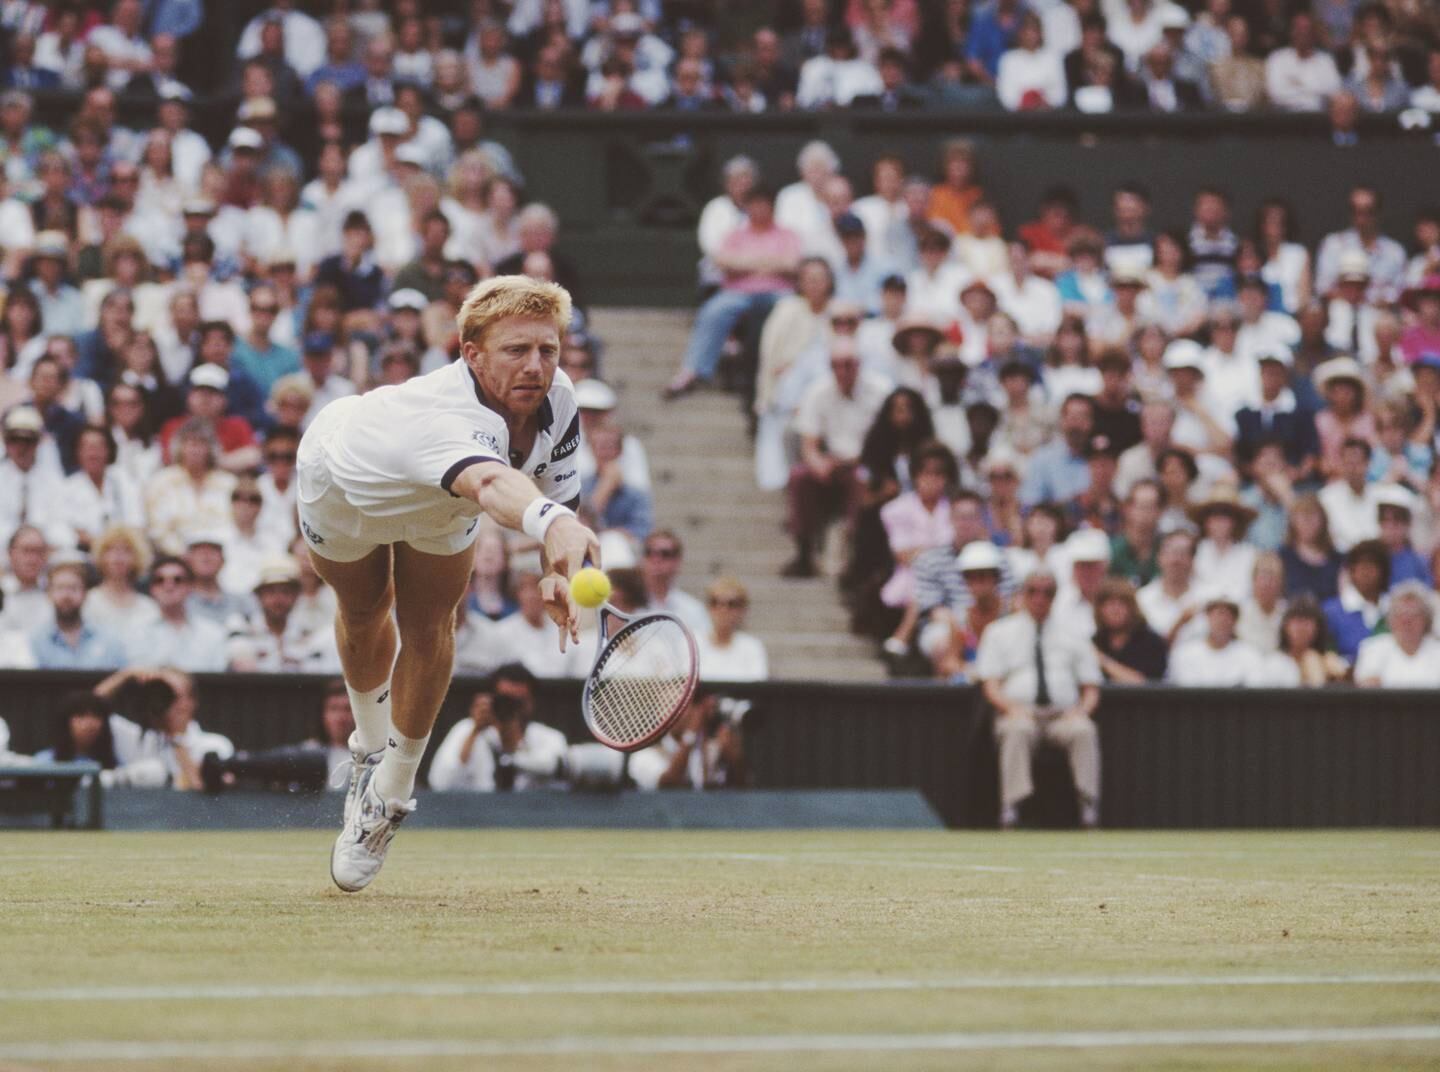 Boris Becker was 17 years old when he won his first Wimbledon title. Getty Images